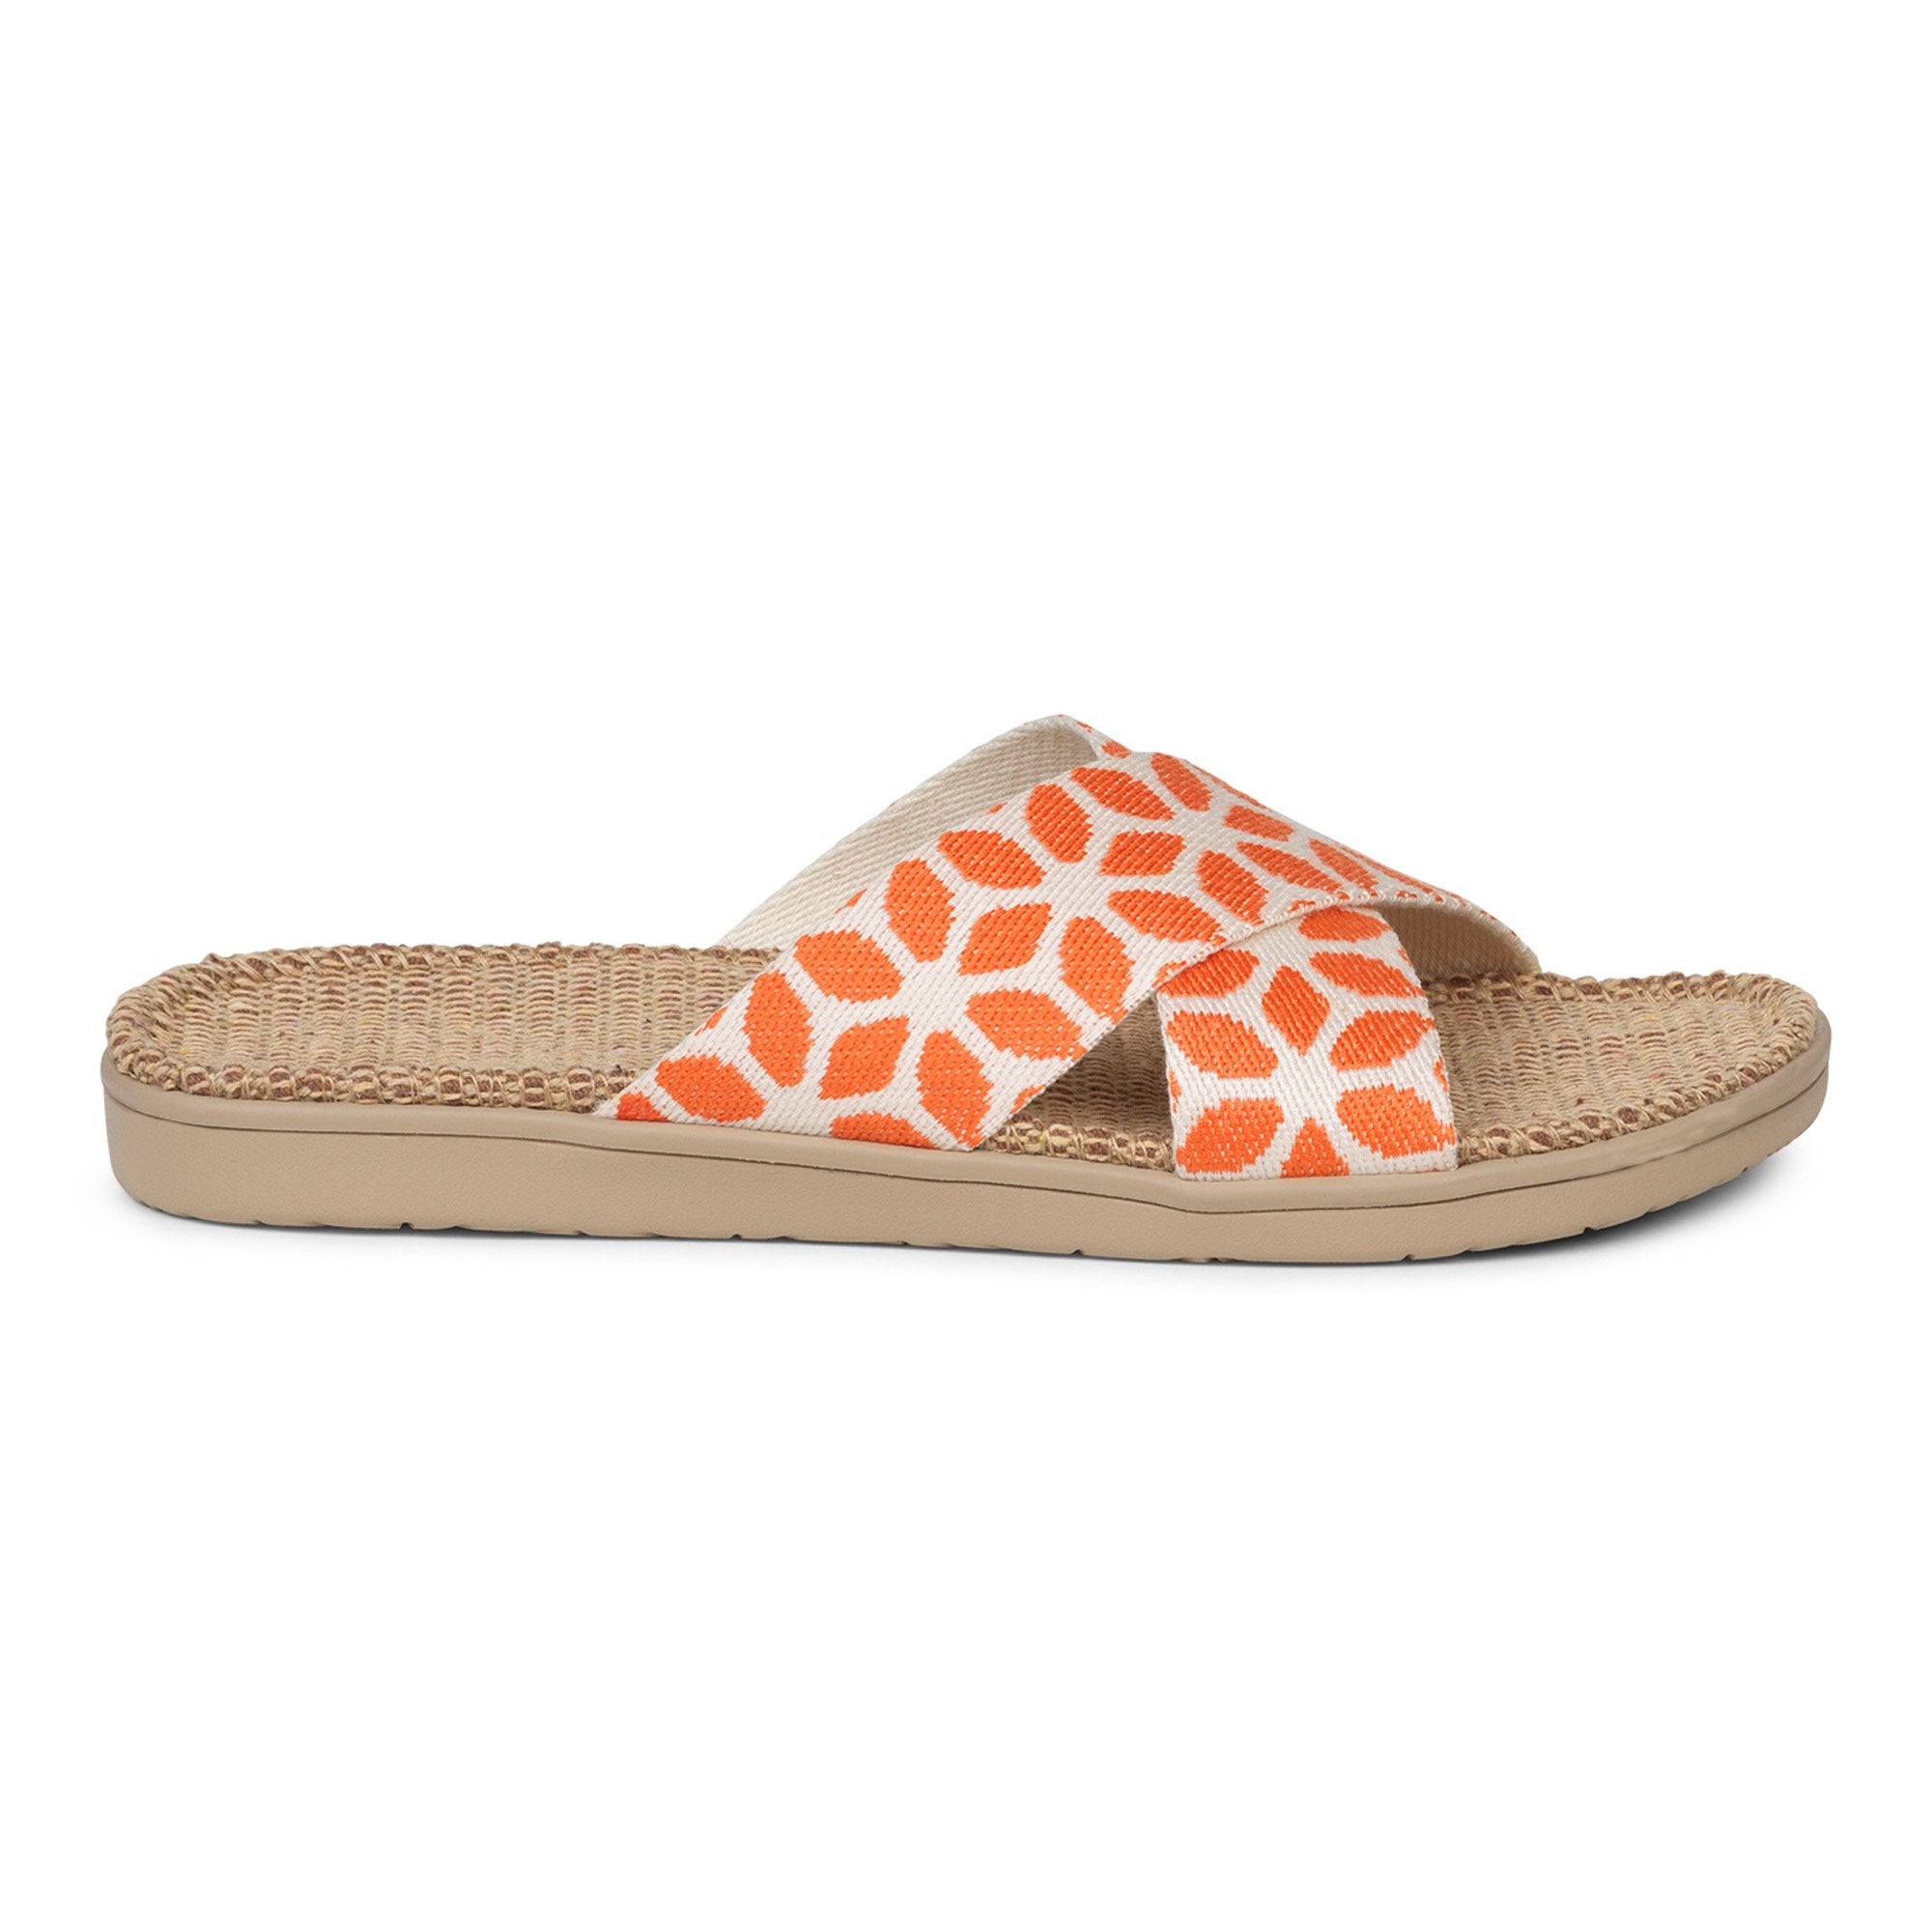 Sandal with flower patterns woven straps. The soft inner sole is covered with natural jute material.